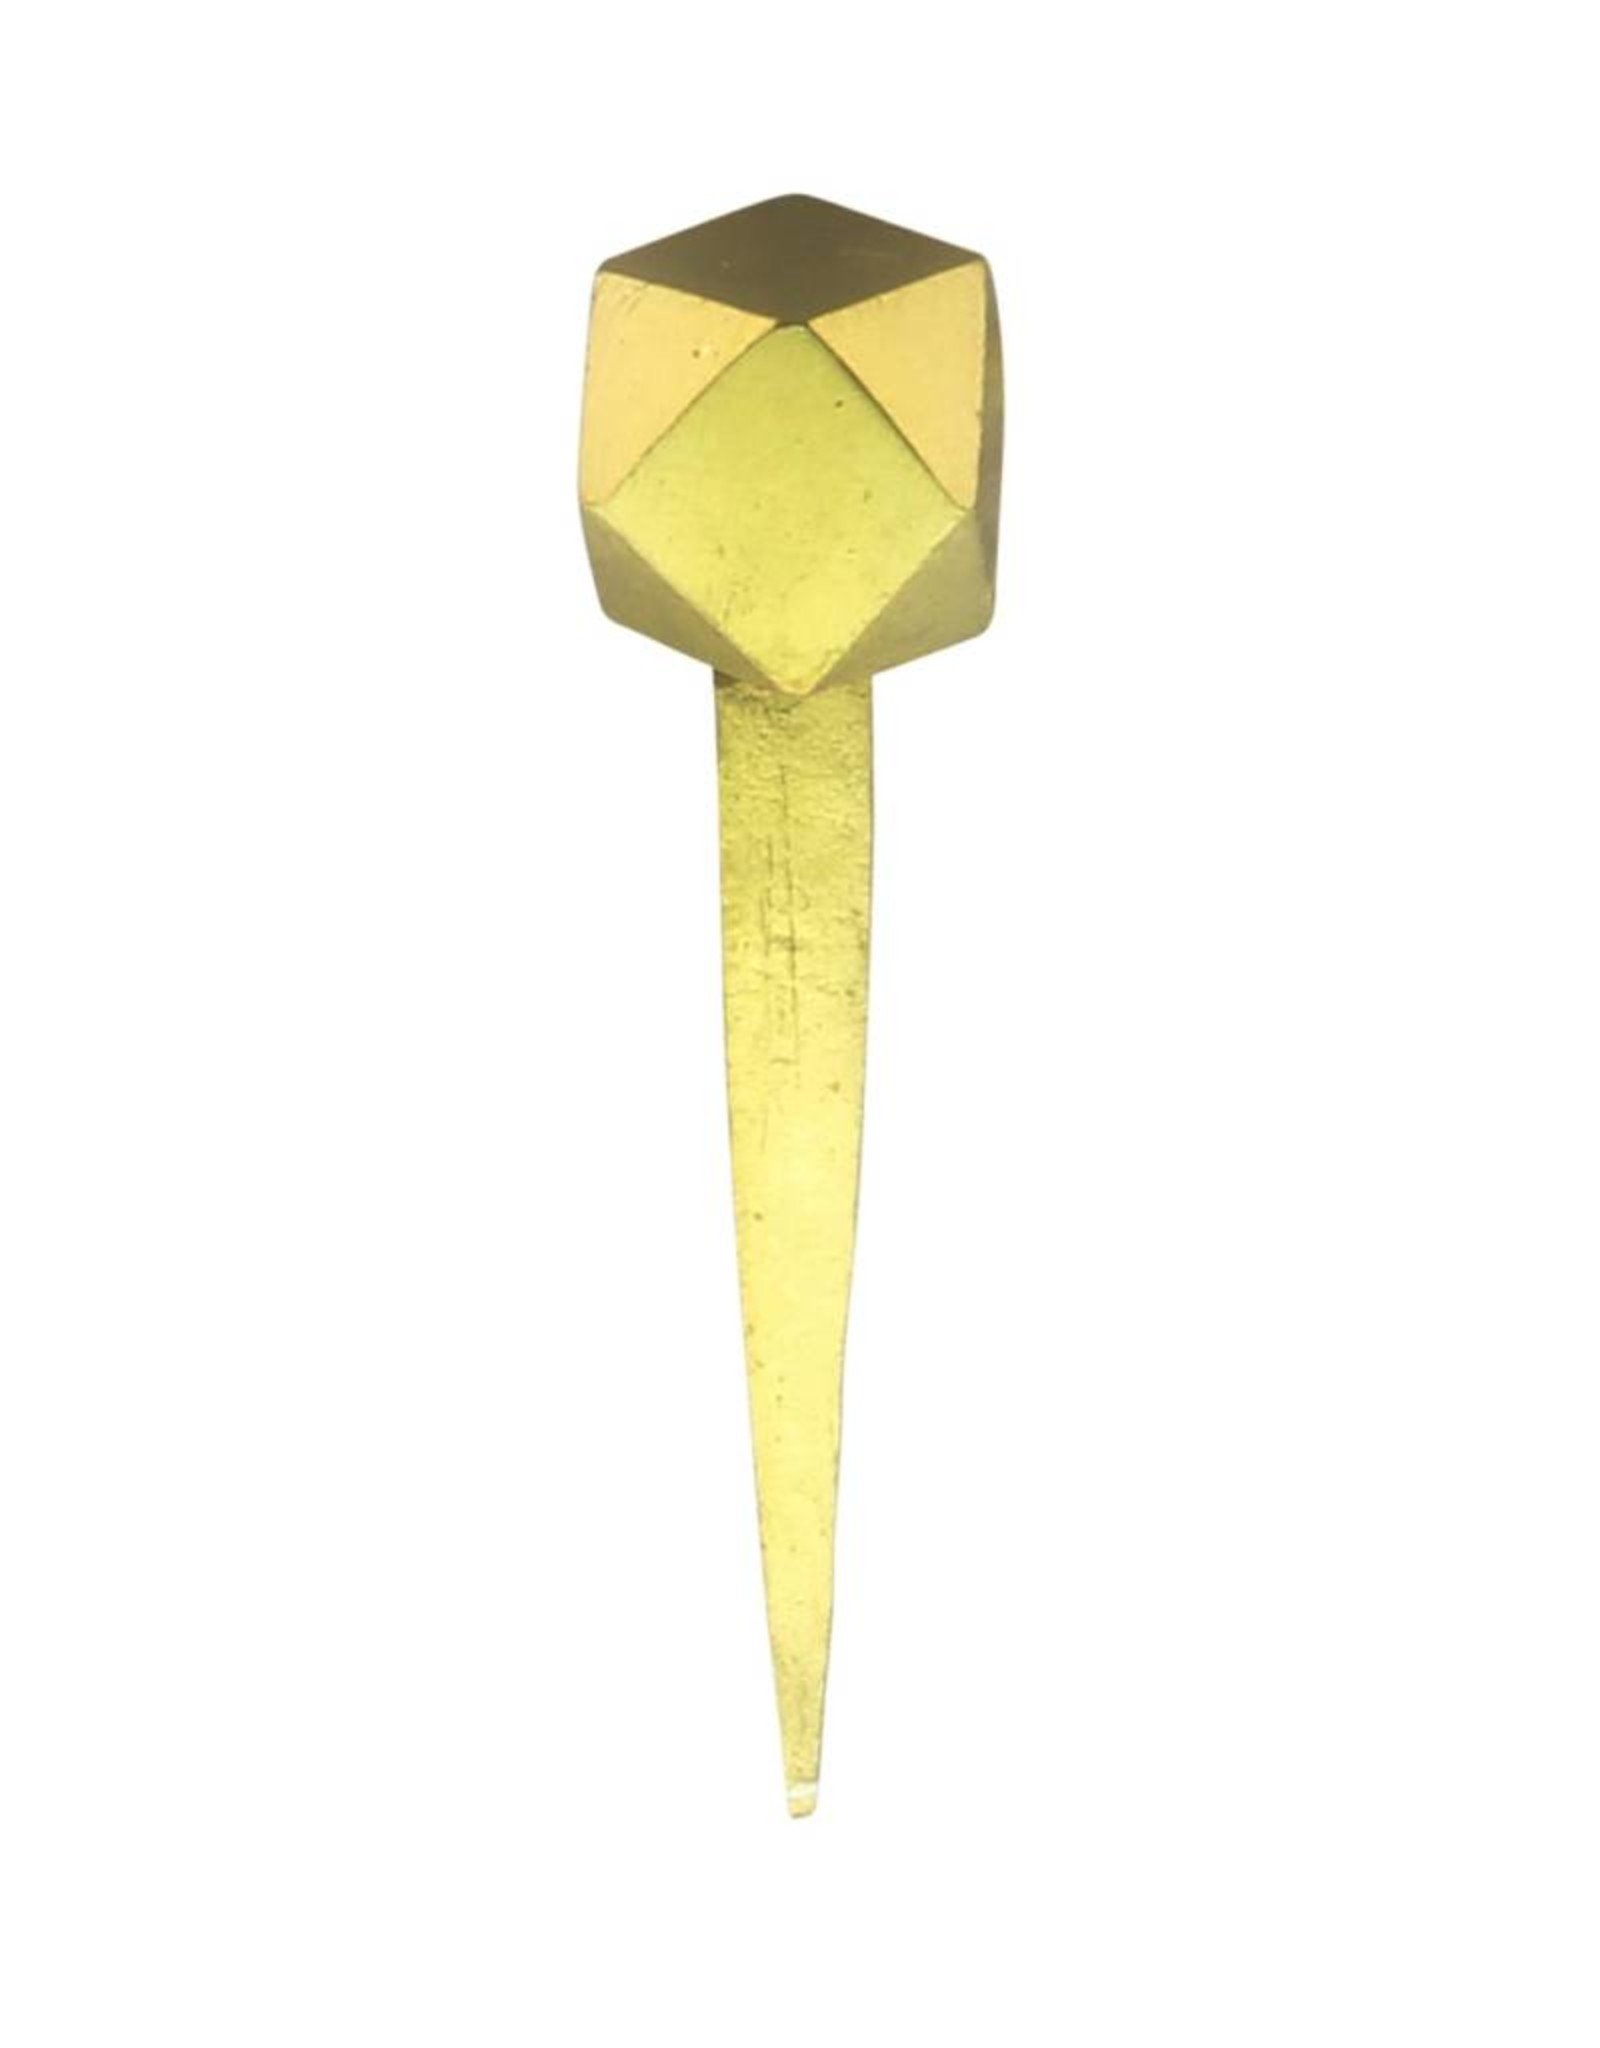 Cubeoctahedron Forged Nail - Brass